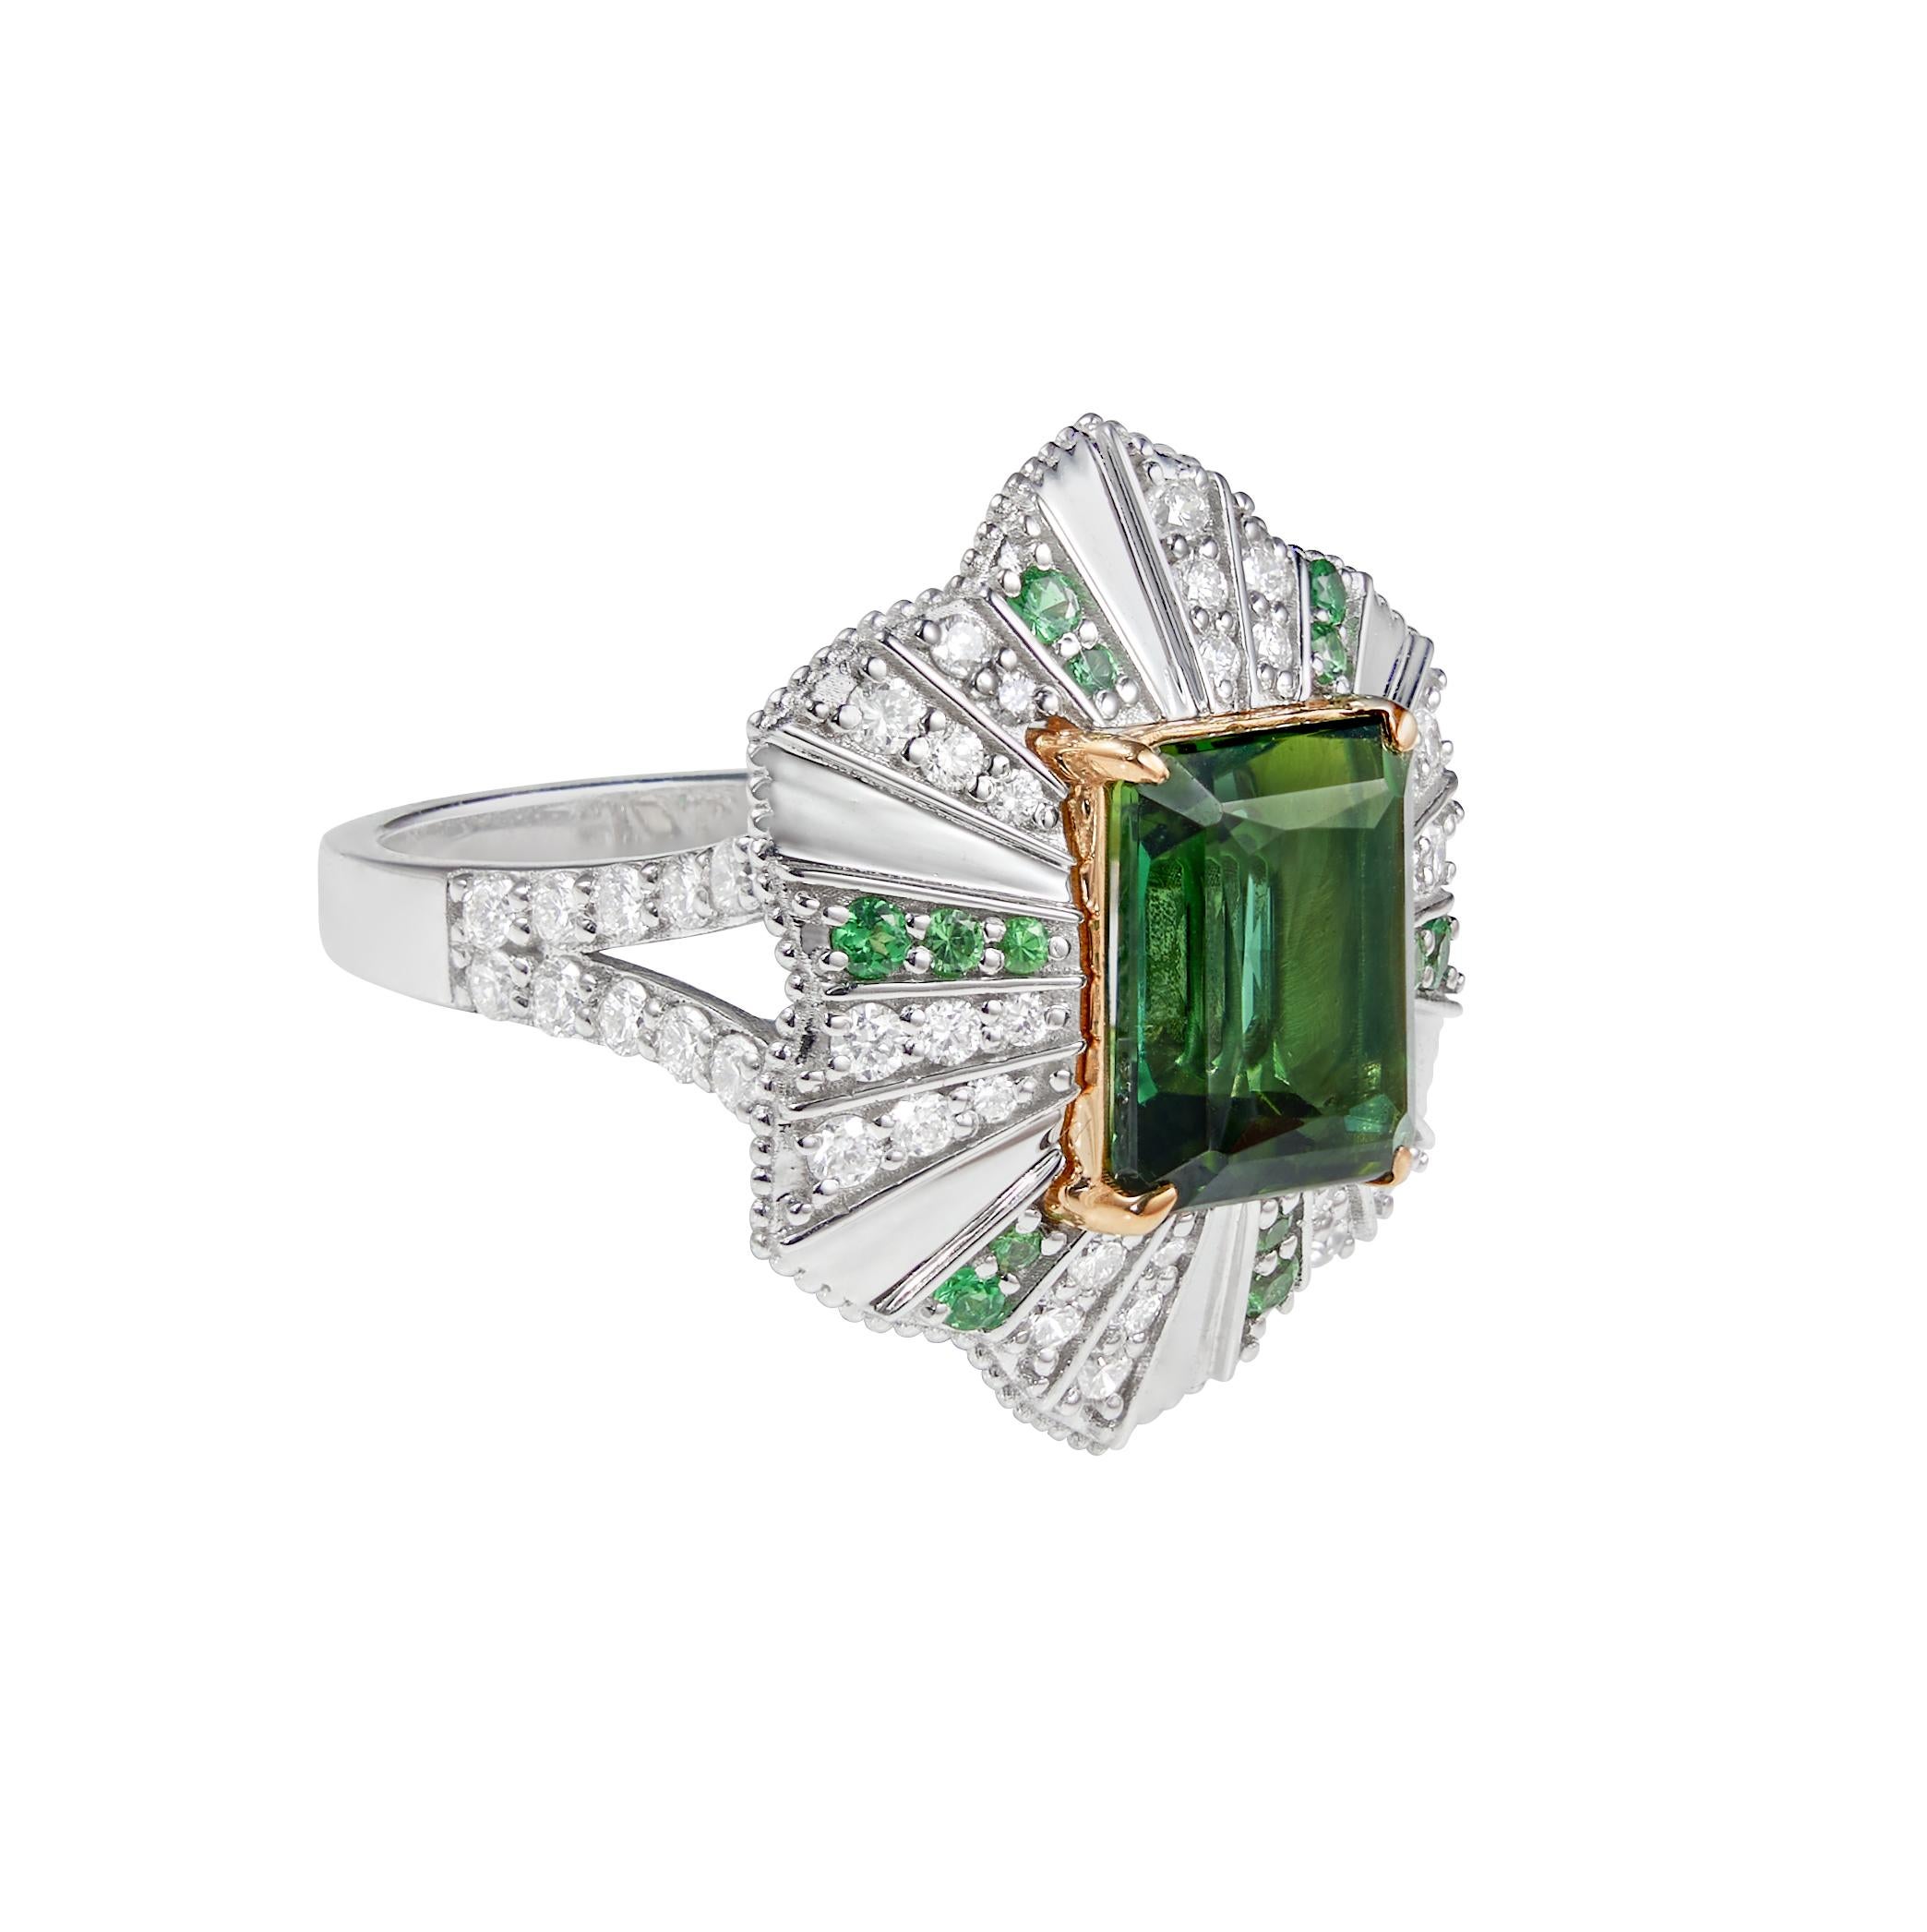 Mystic Green Tourmalines centred on an irregular frame of Tsavorites and Diamonds. Combined with subtle gold detailing the tourmalines are hypnotising with its deep green hue.

Mystic Green Tourmaline Ring with Tsavorites and Diamonds in 18 Karat